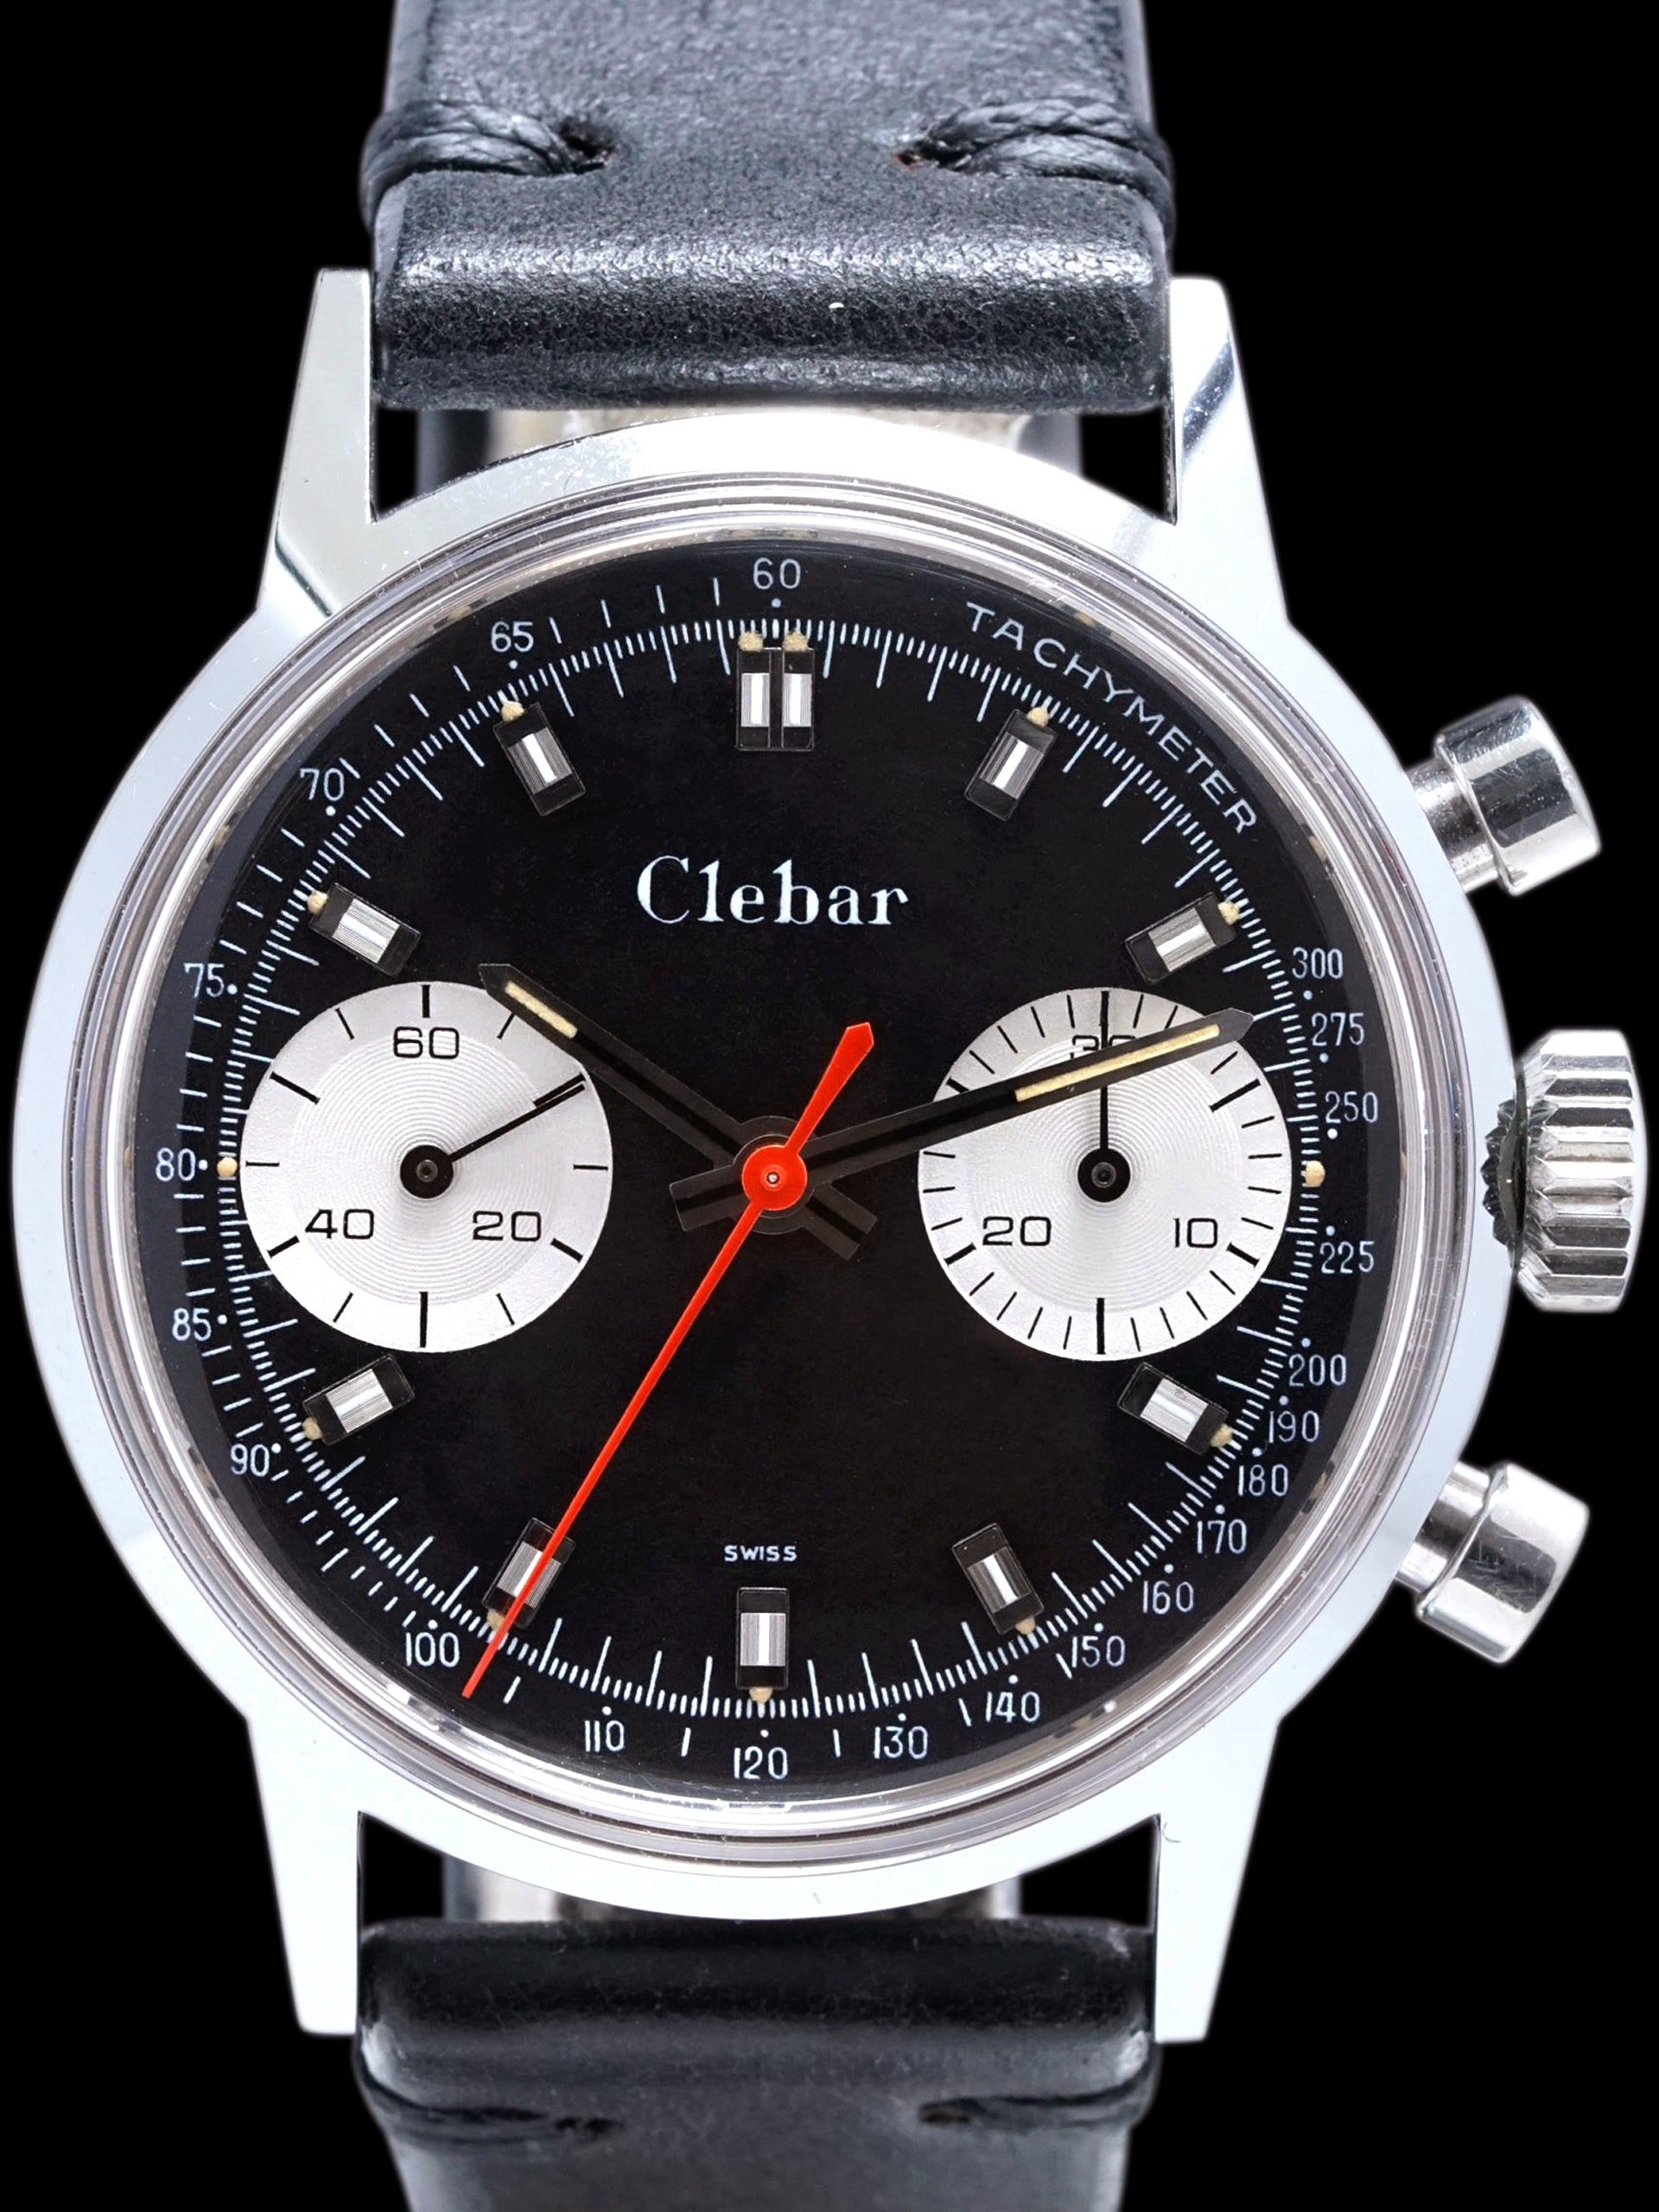 1960s Clebar-Zodiac Chronograph (Ref. 73321) "Made By Heuer" W/ Box & Papers